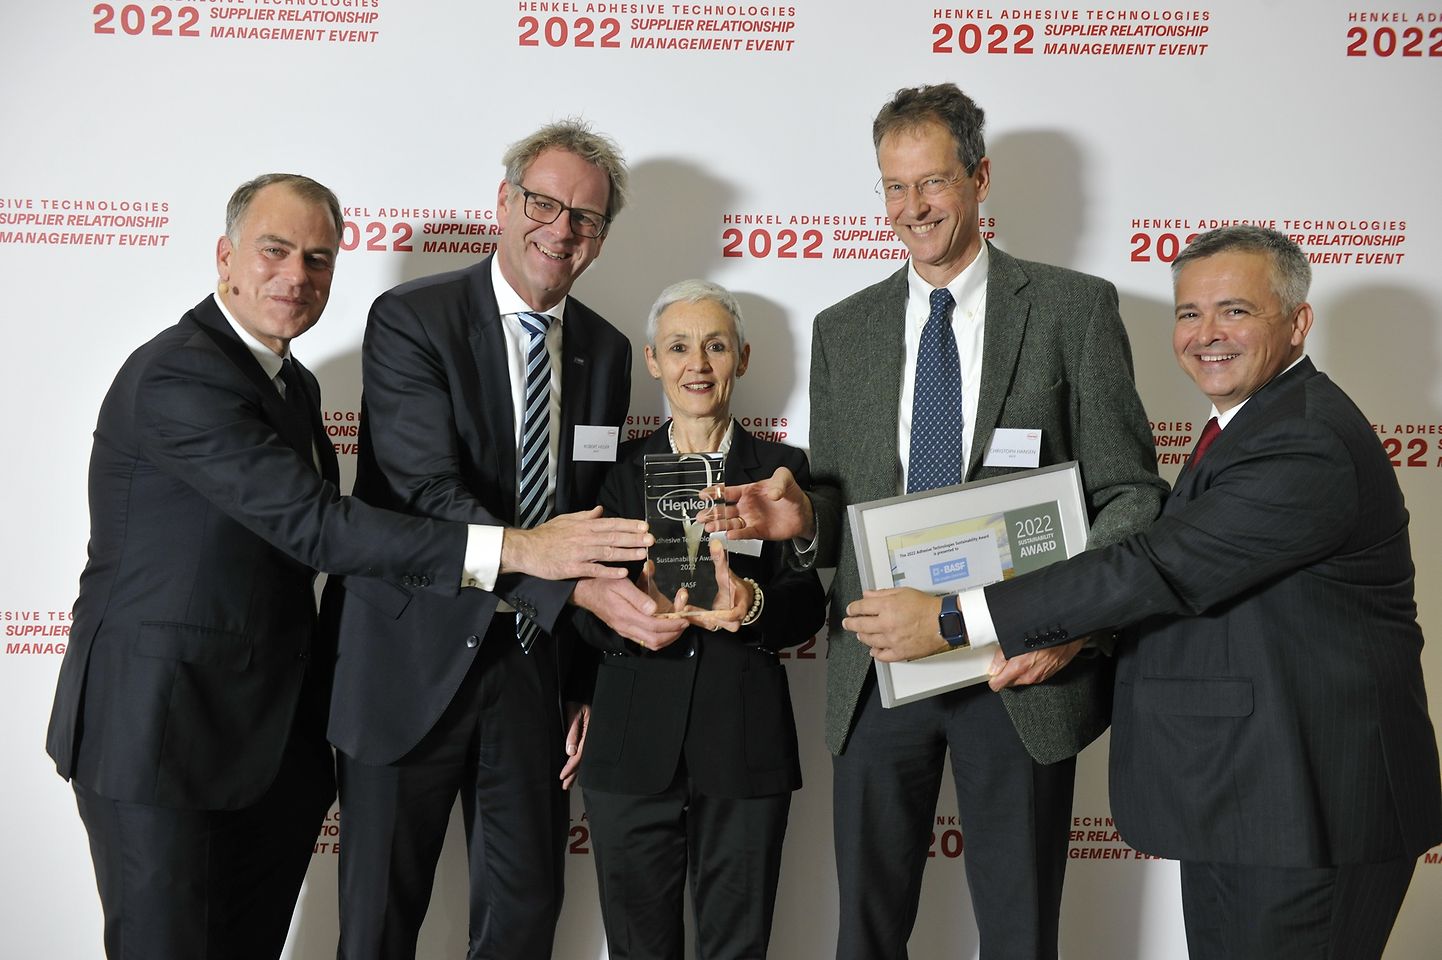 
Sustainability Award for BASF (from left to right): Jan-Dirk Auris, Executive Vice President Henkel Adhesive Technologies, Dr. Robert Heger, Vice President Business Management Dispersions and Additives for Construction and Architectural Coatings at BASF, Heike Kohm, Head of Global Key Account Management Dispersions, Resins and Additives at BASF, Christoph Hansen, Senior Vice President Dispersions for Adhesives and Construction Europe at BASF and Csaba Szendrei, Corporate Senior Vice President Packaging and Consumer Goods at Henkel Adhesive Technologies
